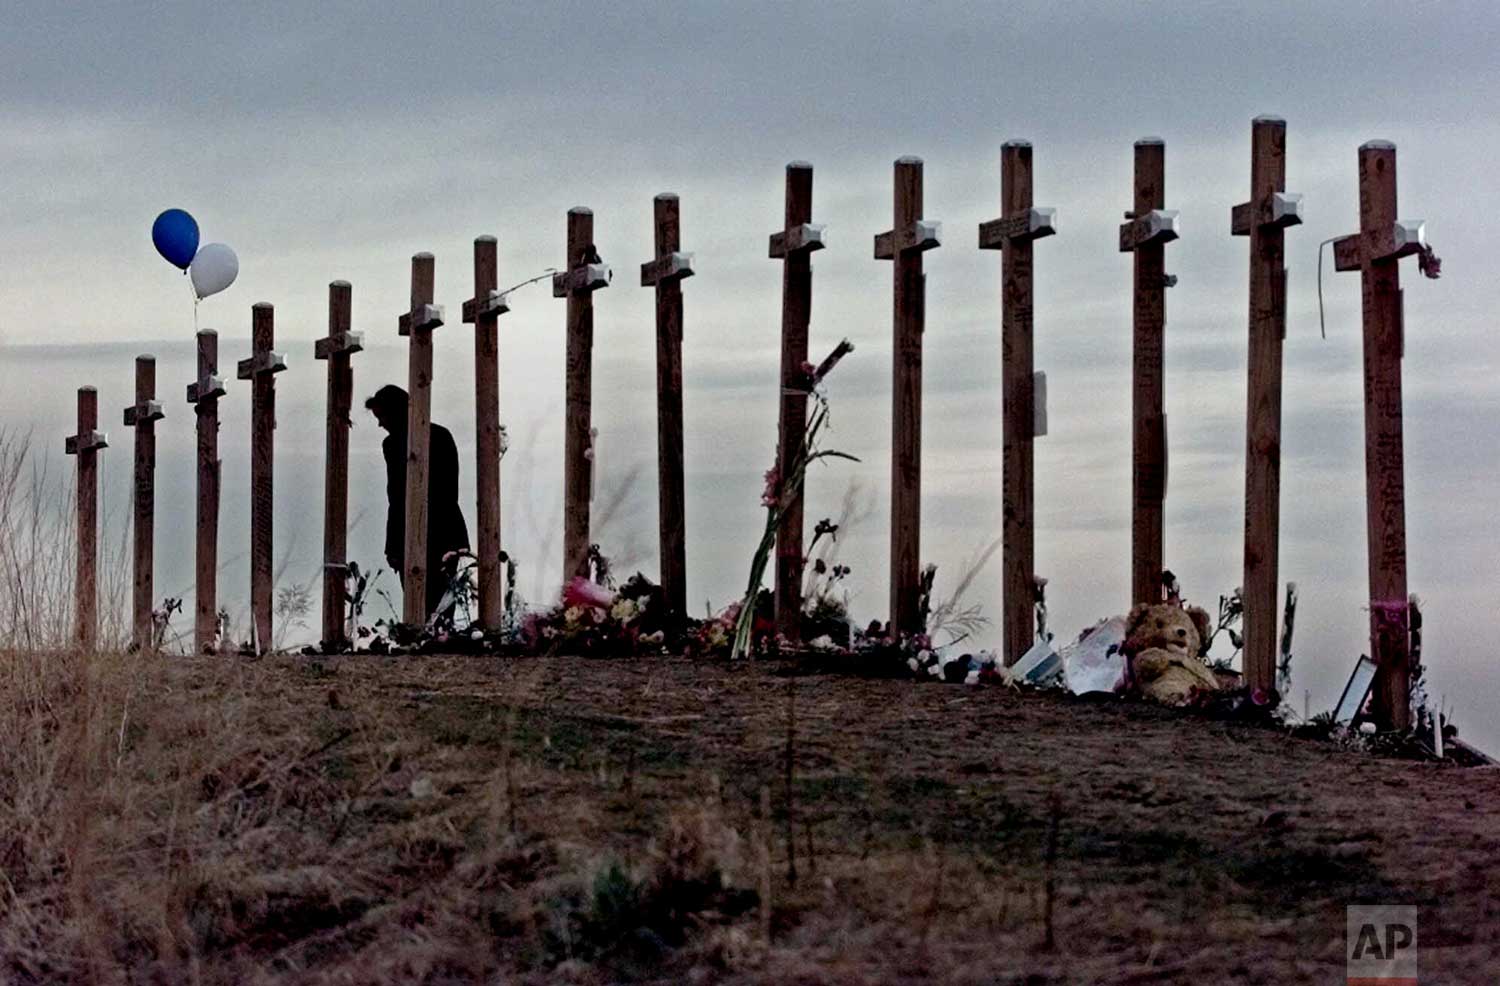  An unidentified woman looks at 15 crosses posted on a hill above Columbine High School in Littleton, Colo. Wednesday, April 28, 1999 in remembrance of the 15 people who died during a shooting rampage at the school. (AP Photo/Eric Gay) 